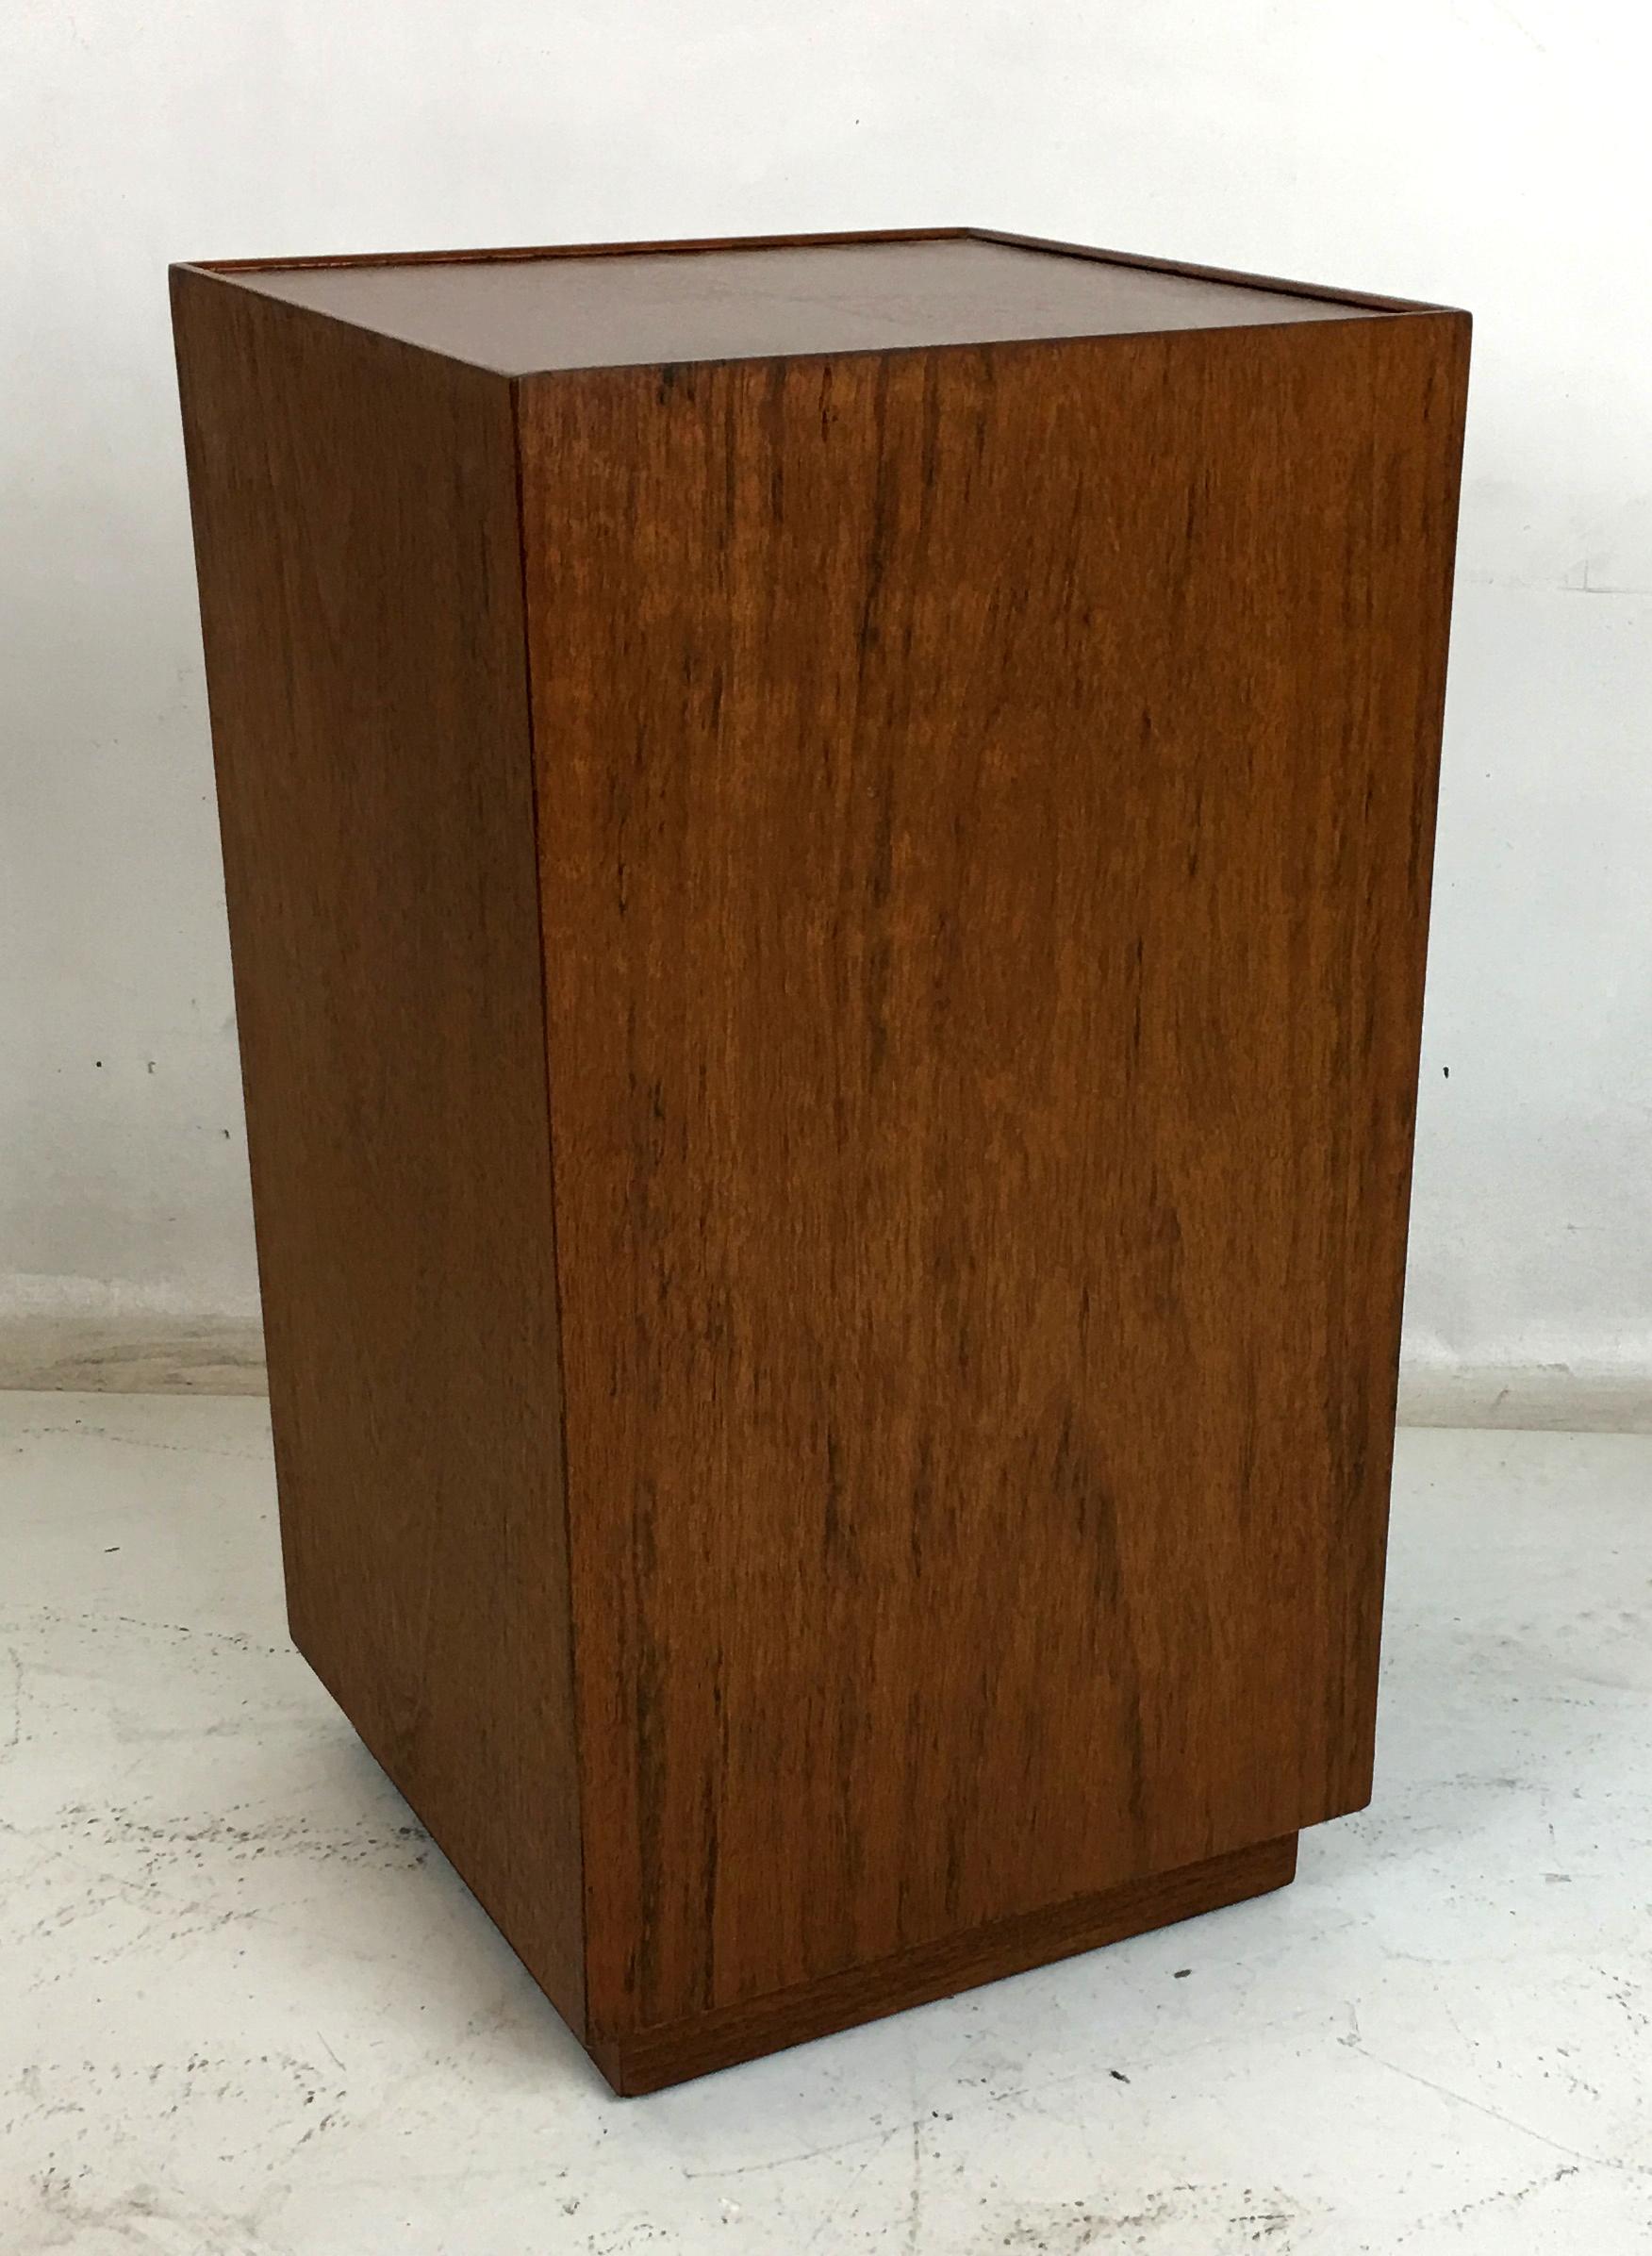 Beautiful and vividly grained mahogany side table with quarter matched top, perfect as a drinks table for your favorite Lounge chair. The table has been refinished to like new condition.